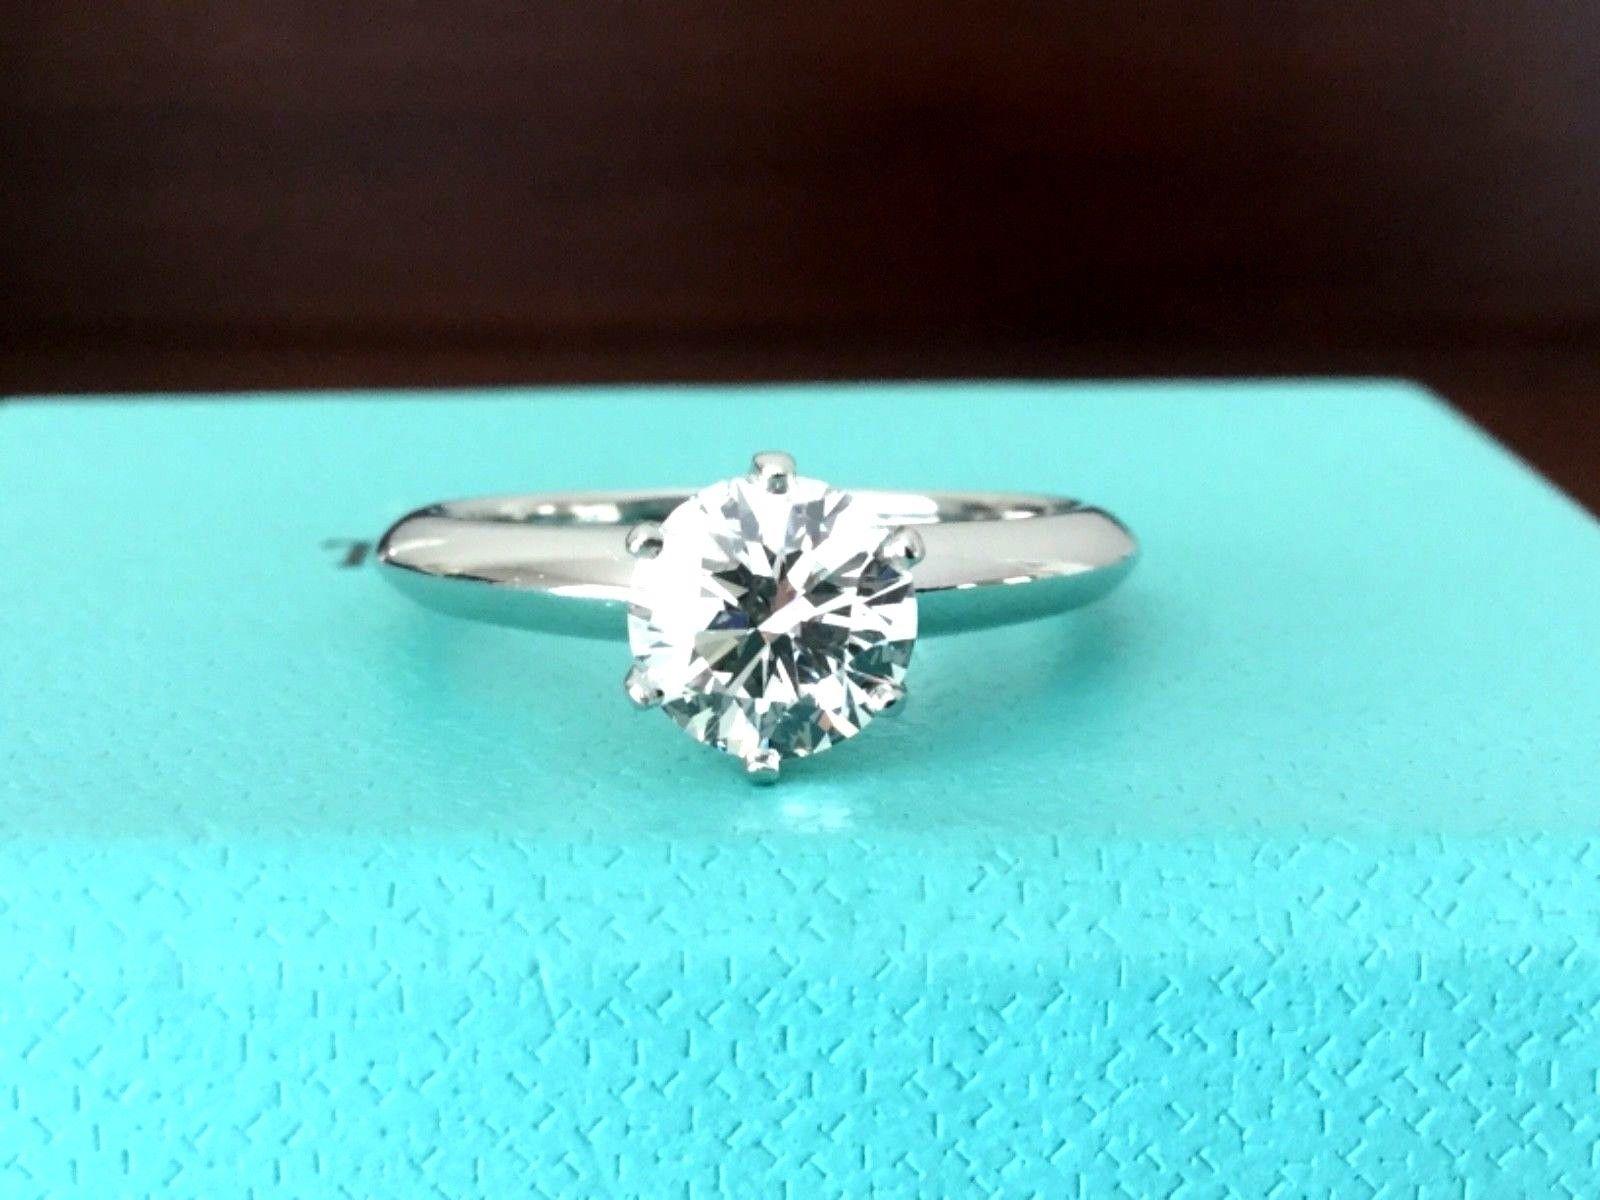 Being offered for your consideration is a stunning Tiffany & Co Platinum and Diamond 1.08 carat natural round engagement ring set in the classic 6 prong setting.  The ring shows like brand new! 

This ring currently retails at Tiffanys for $17,000